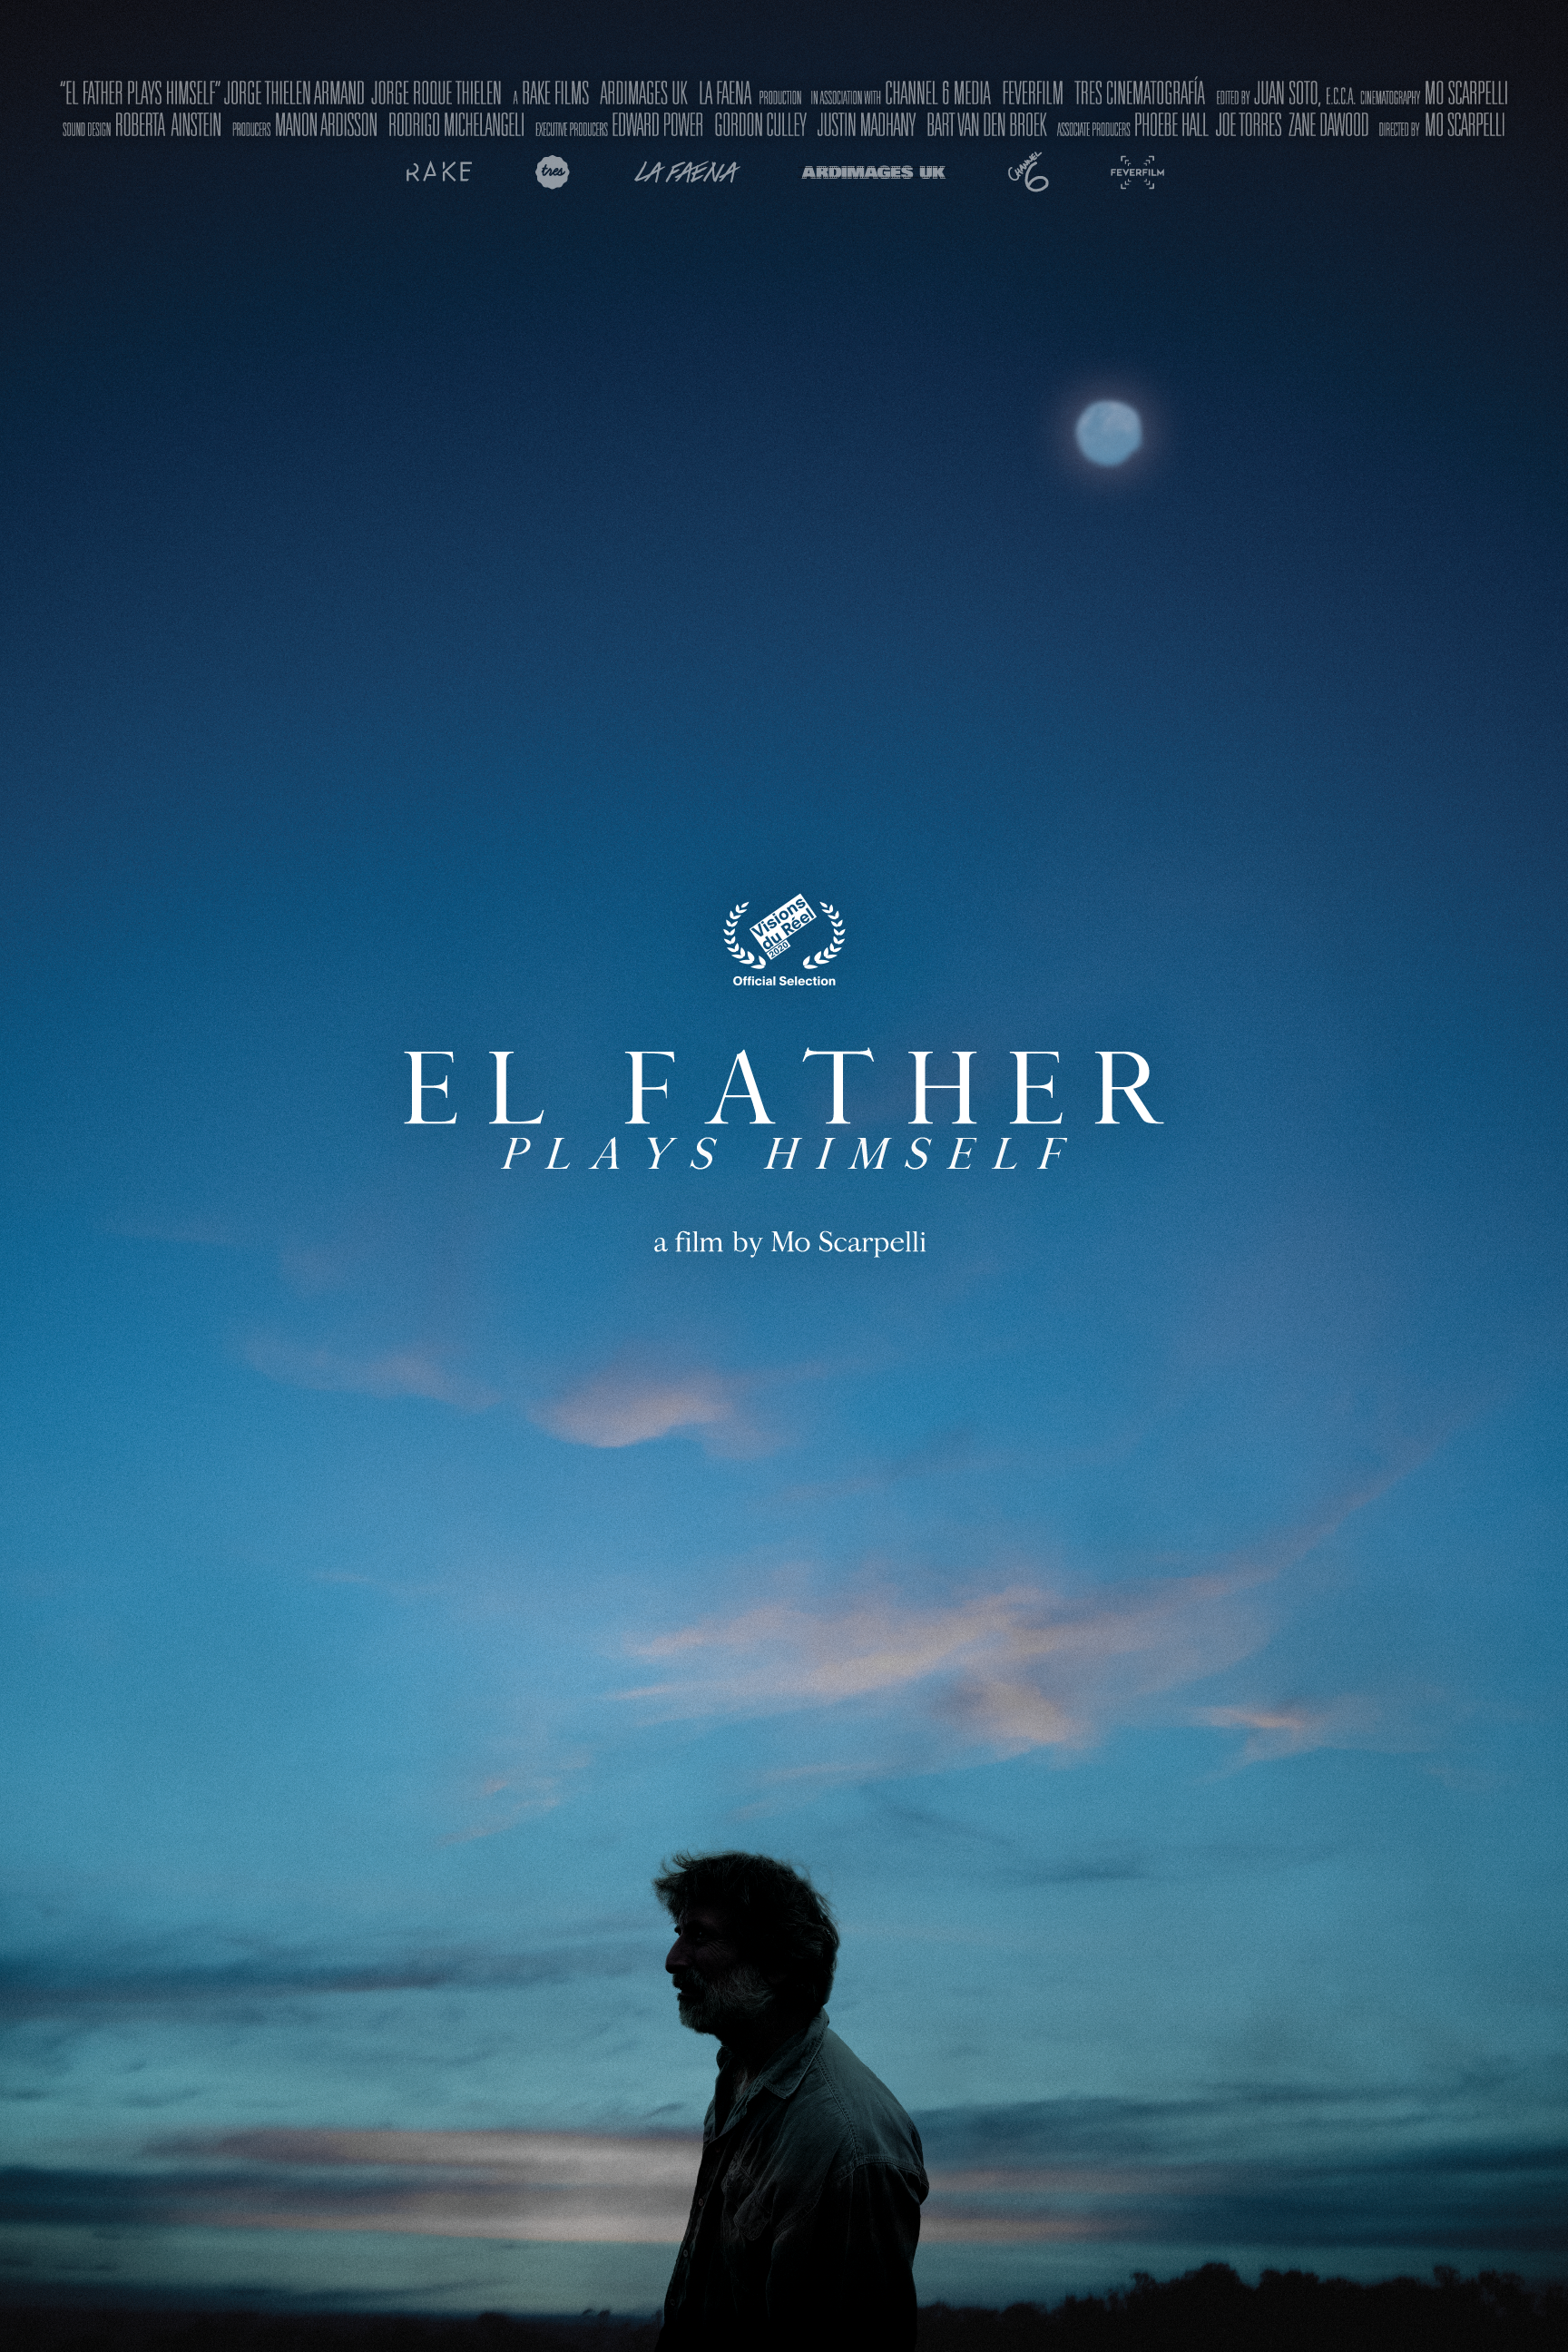 FATHER_Poster02Payoff_LoRes-RGB.png